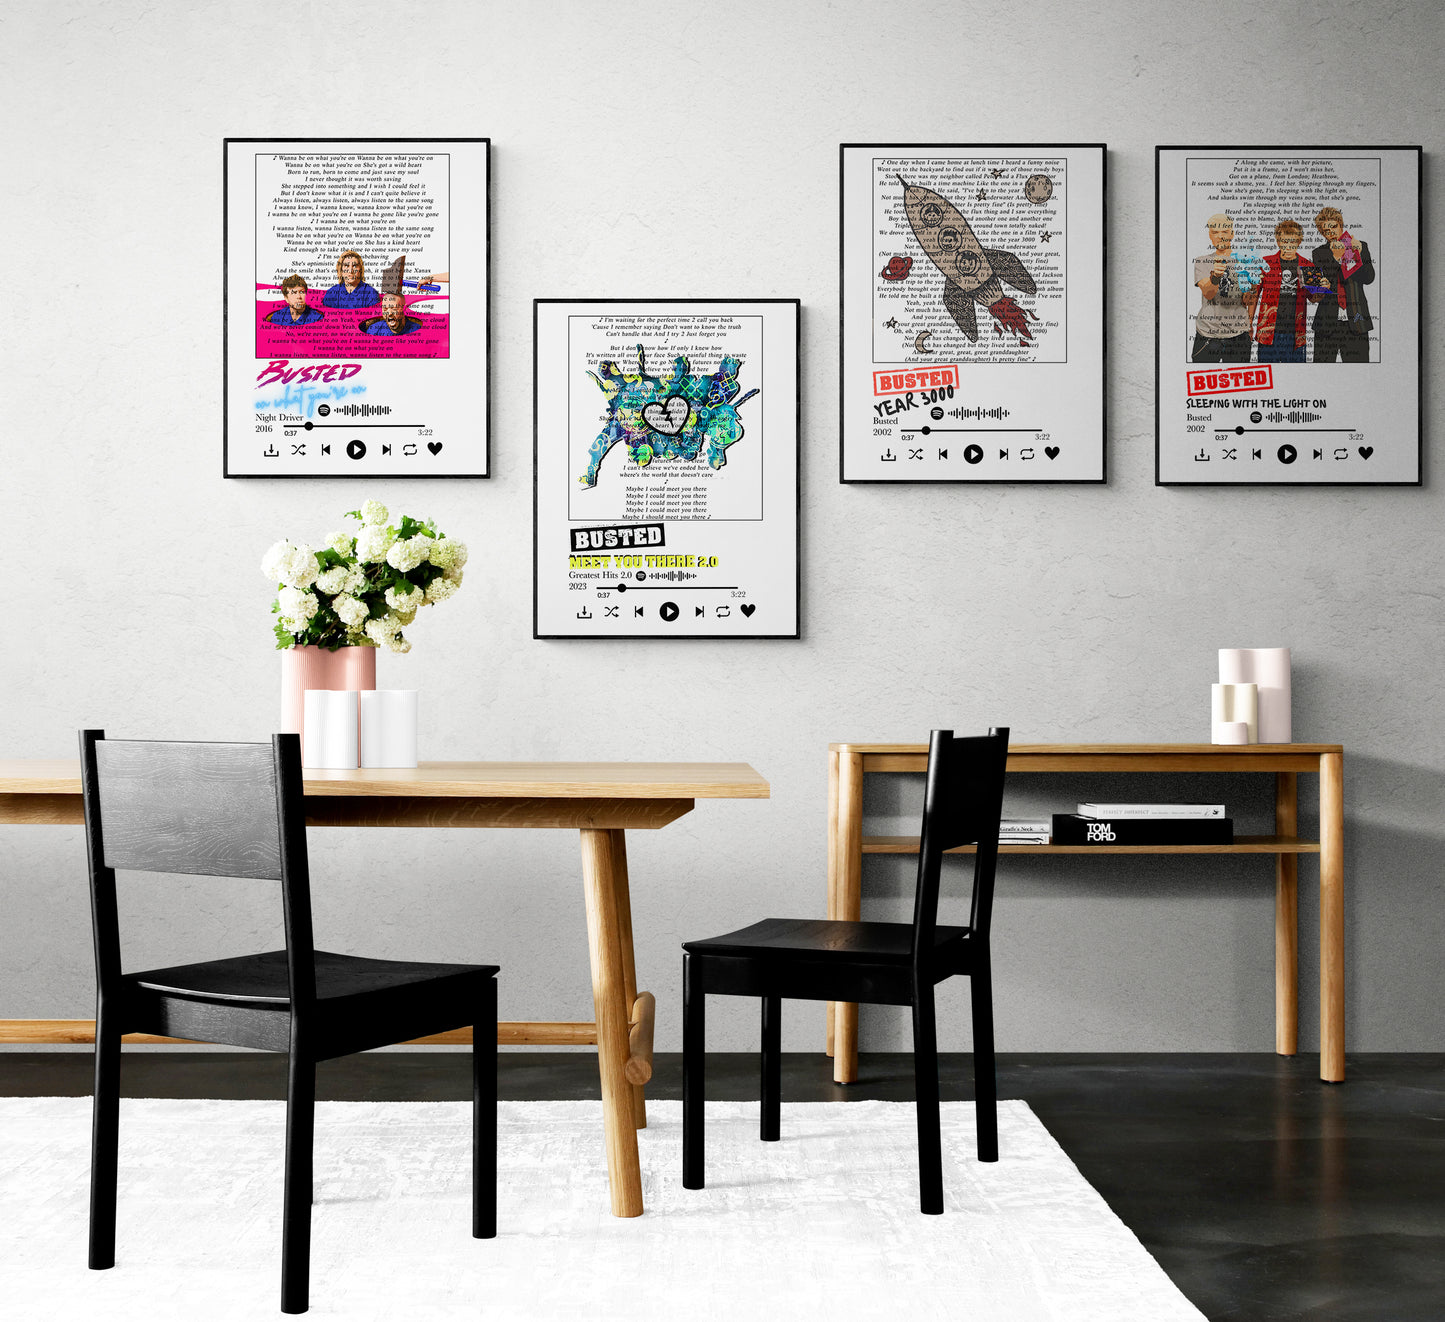 Explore 98 unique Posters & Art Prints available in the UK. Our handmade posters are perfect for adding style and personality to any room in your home. The most popular illustrations and photos are available to decorate and liven up your walls.